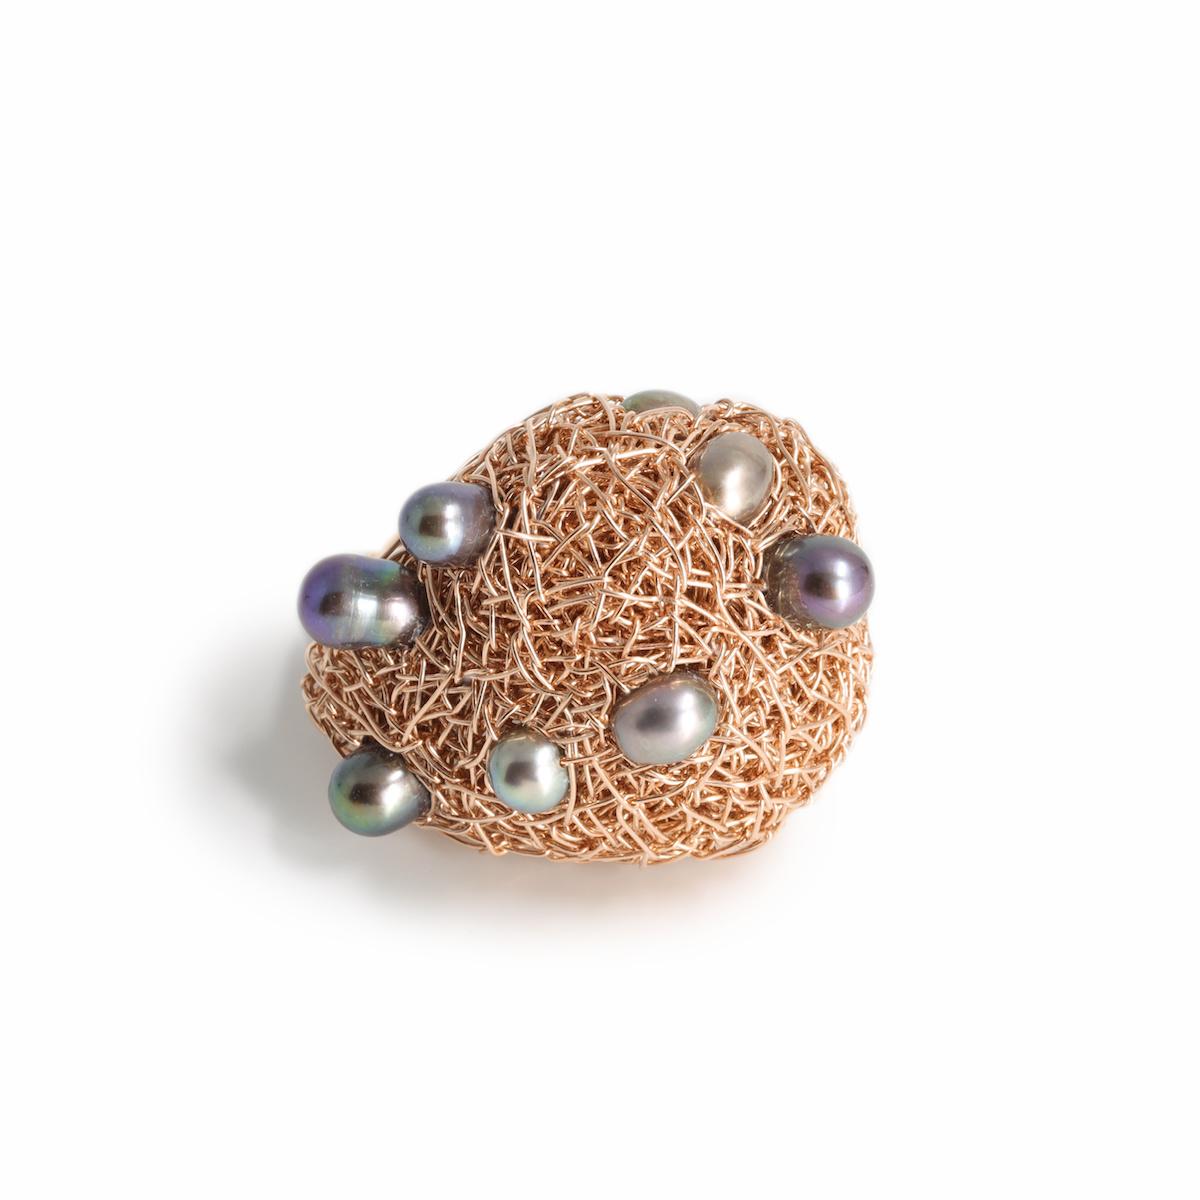 Women's or Men's Grey and black Pearls in 14 Karat Rose Gold F Woven Statement Cocktail Ring